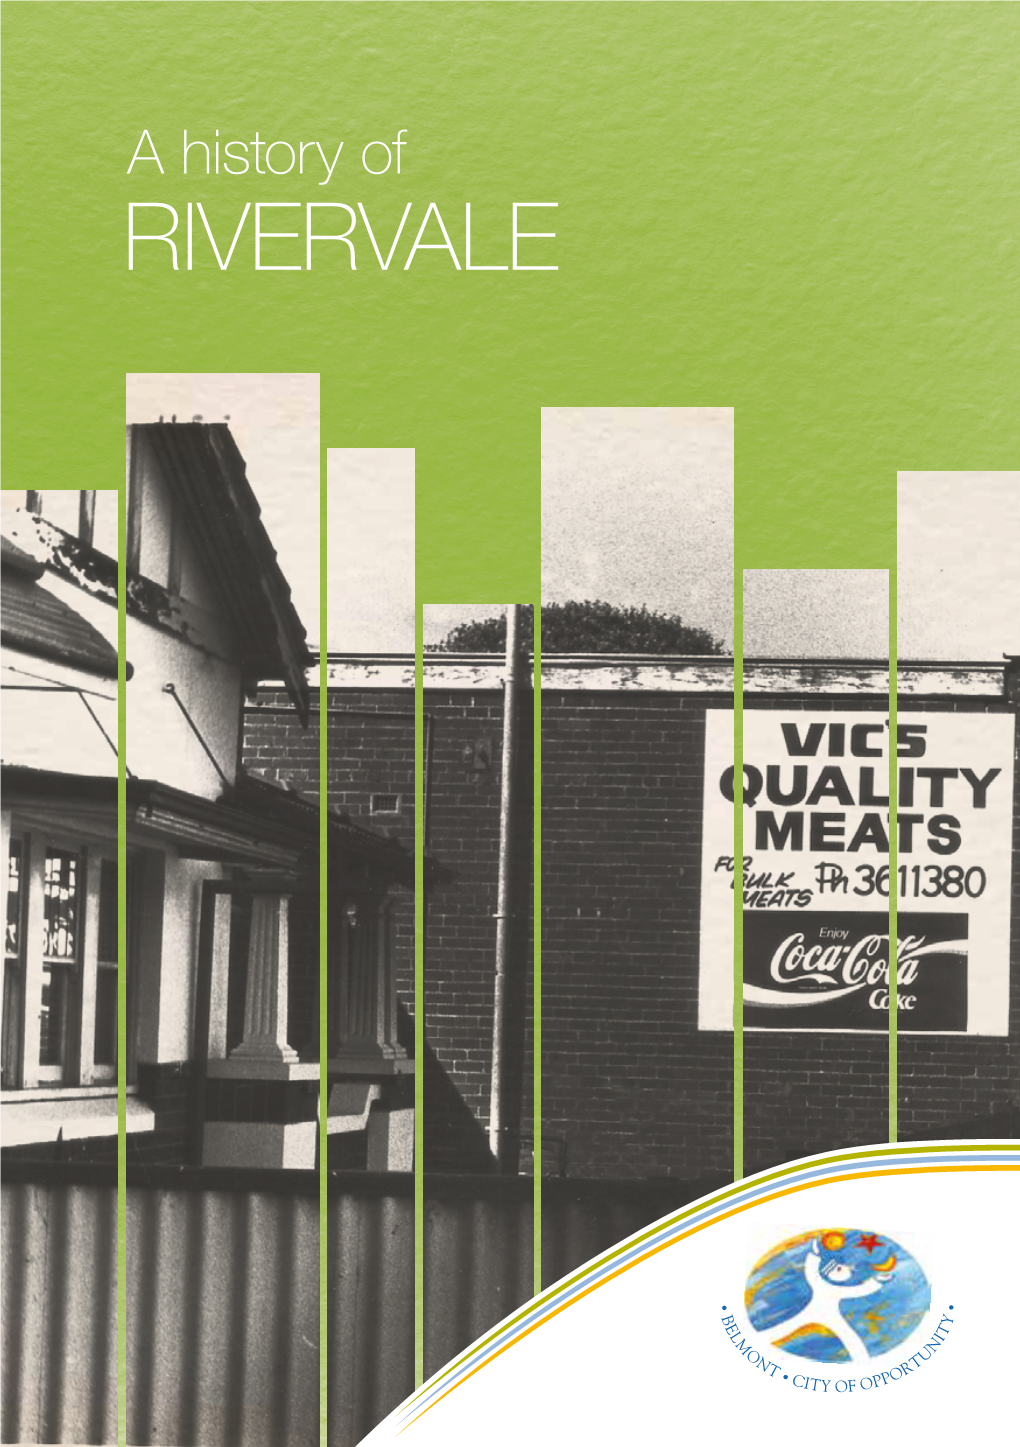 A History of RIVERVALE Rivervale Was Known As Barndon Hill Rivervale Was First Used As the Name of Until 1884